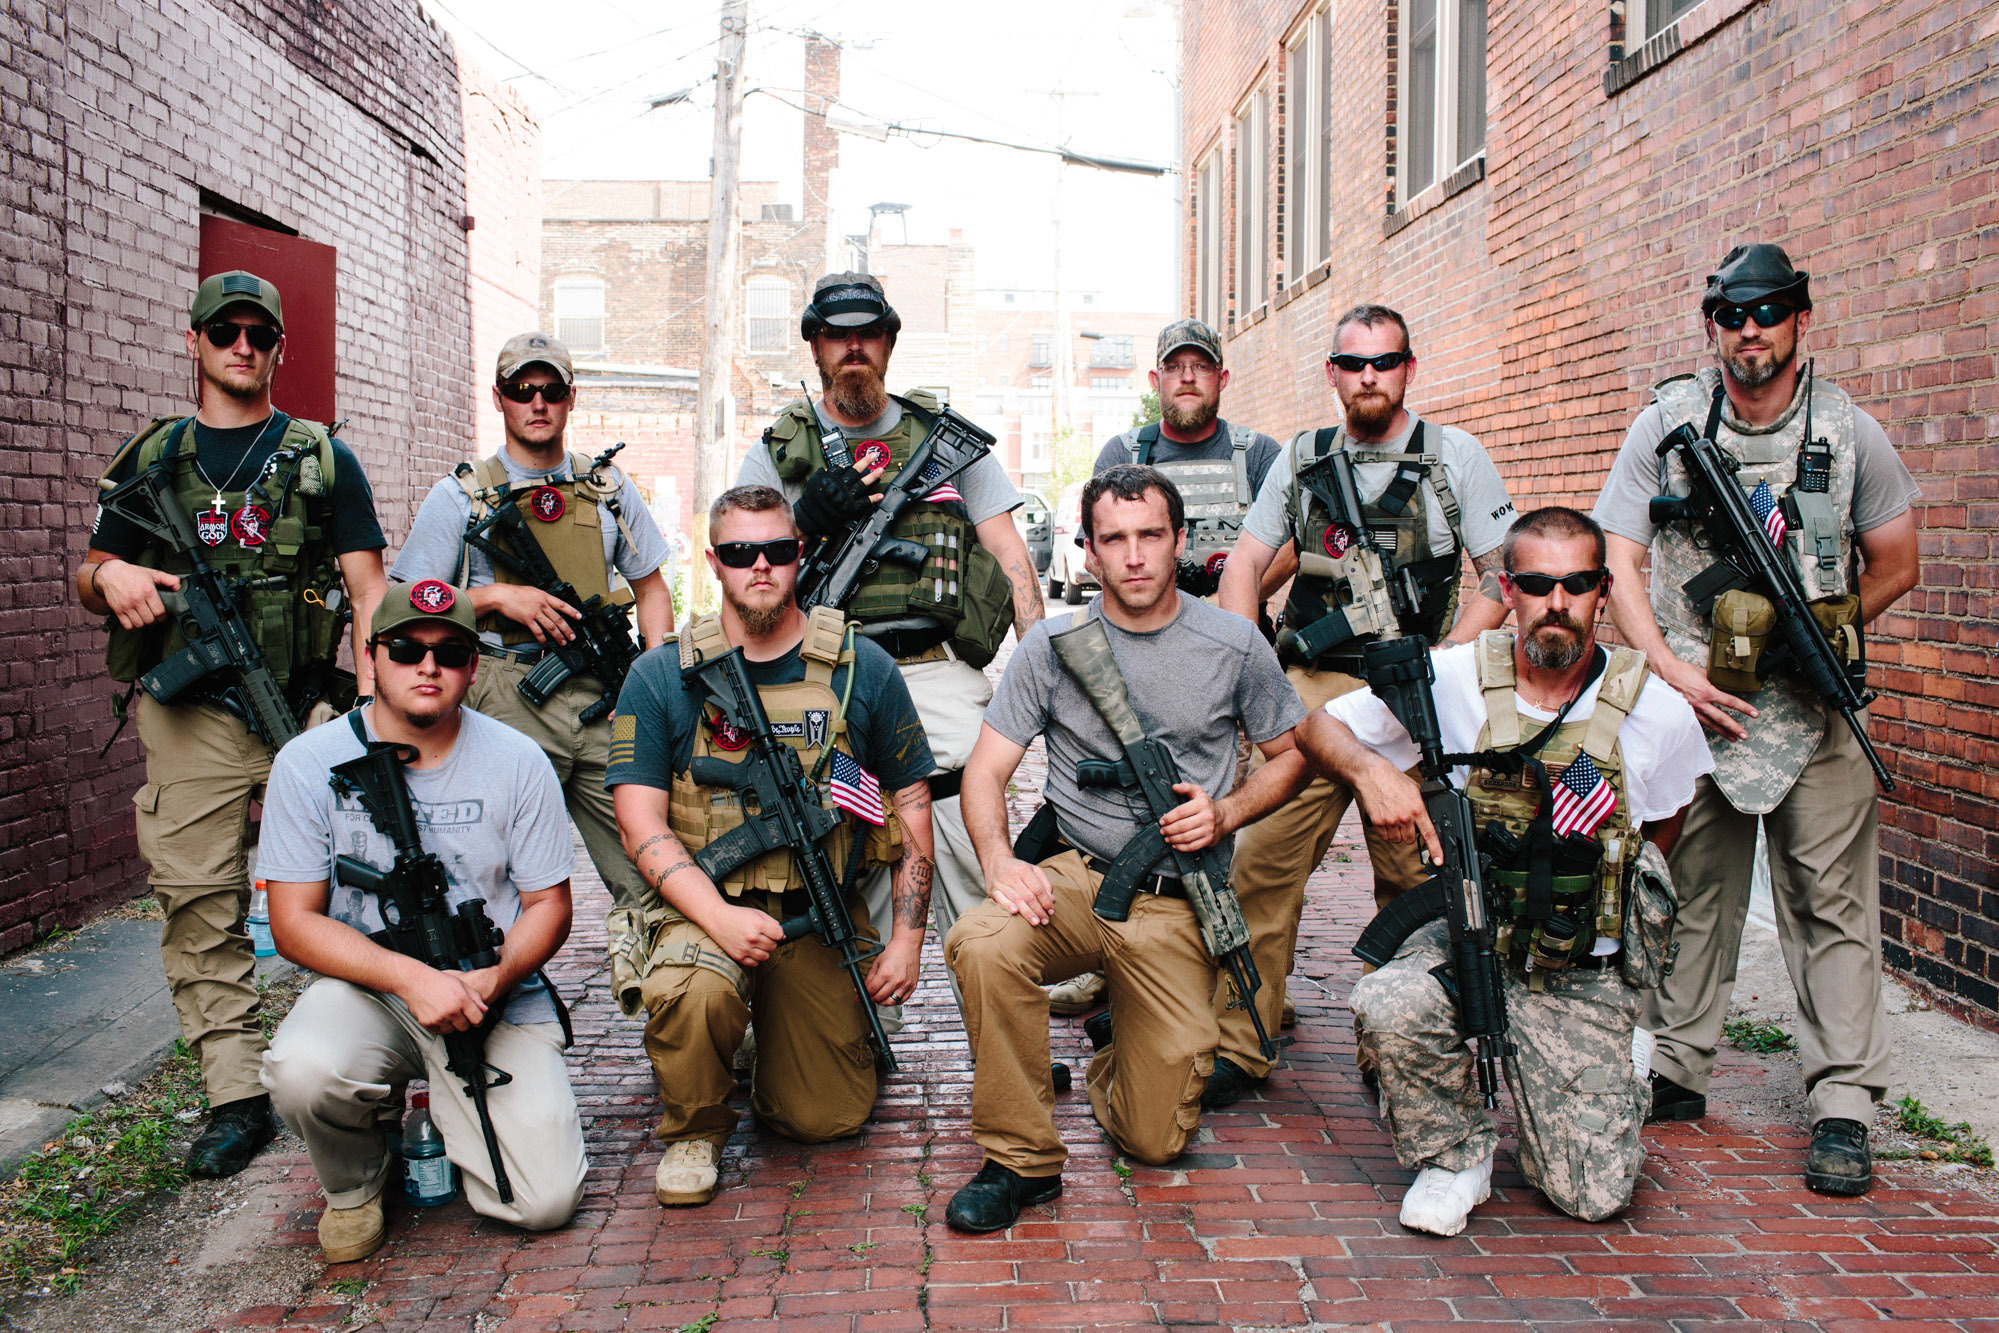 this-militia-group-walked-around-the-rnc-with-ar-15s-ak-47s-and-g3s-801-1468892859.jpg